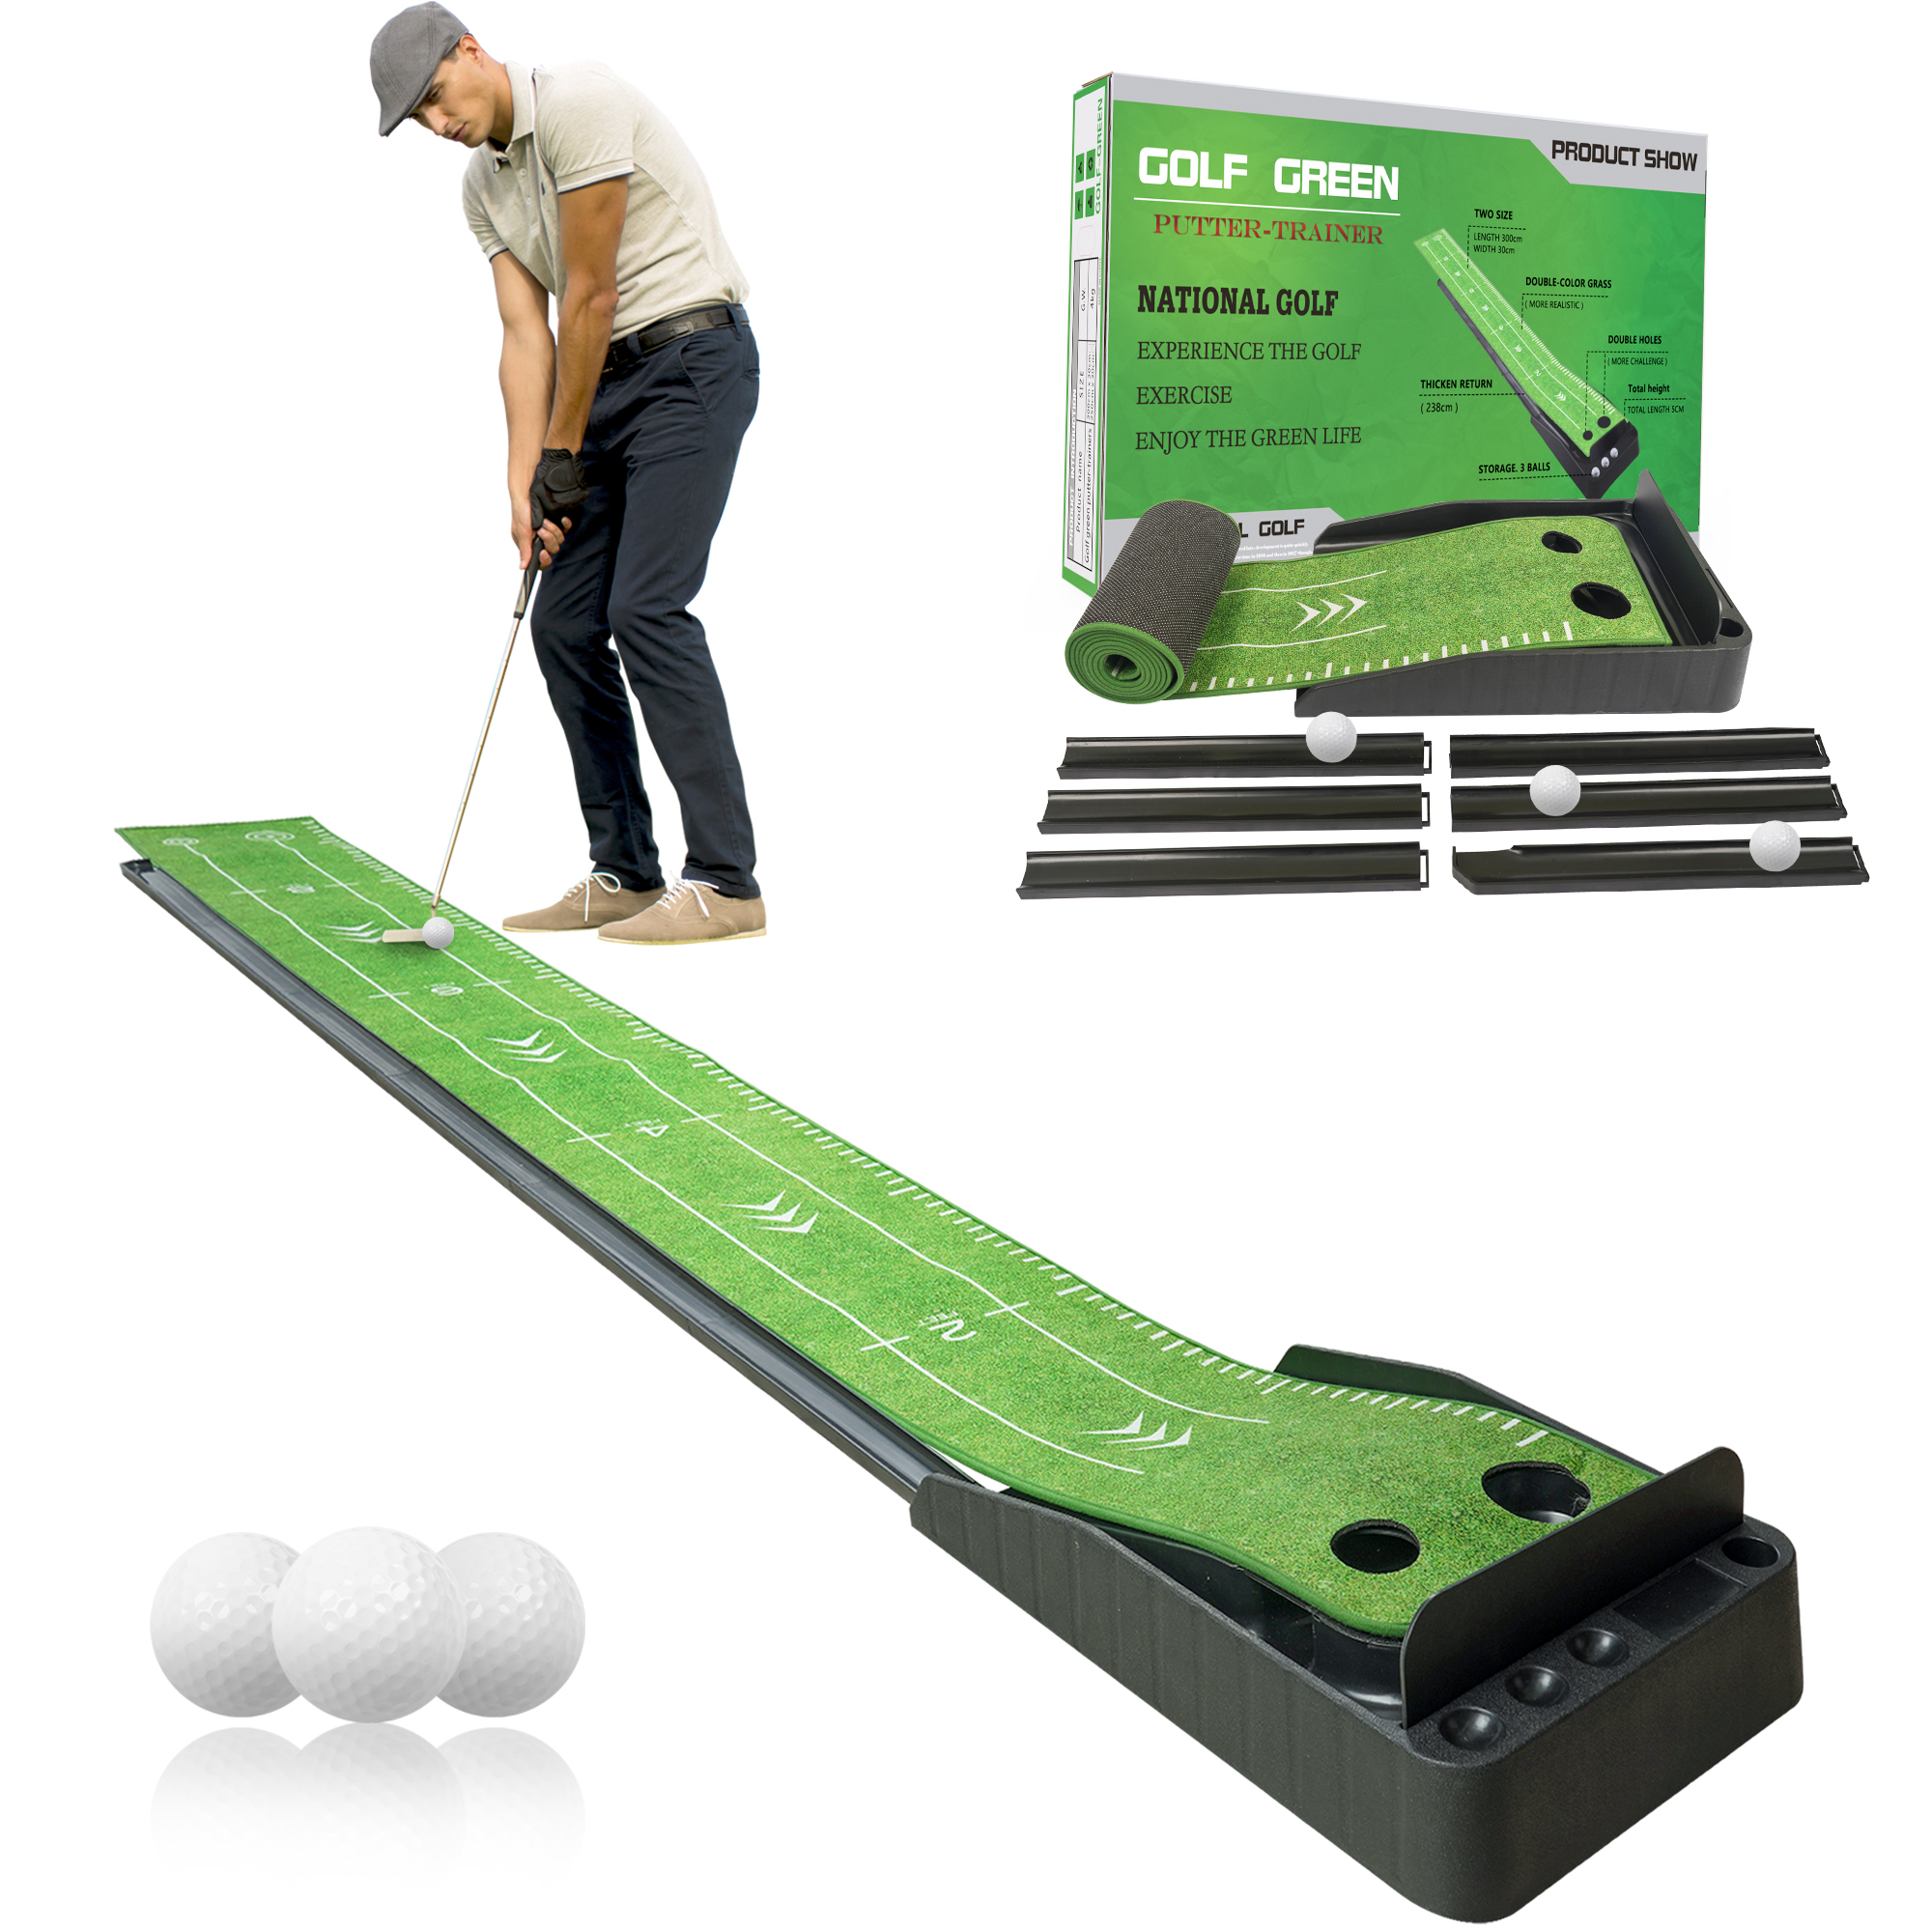 Segmart Putting Green Golf Mat for Indoors, Golf Training Bundles with 3 Bonus Balls, Improve Accuracy and Speed, Auto Ball Return, Indoor/Outdoor Practice Golf Accessories Golf Gift for Men - image 1 of 9